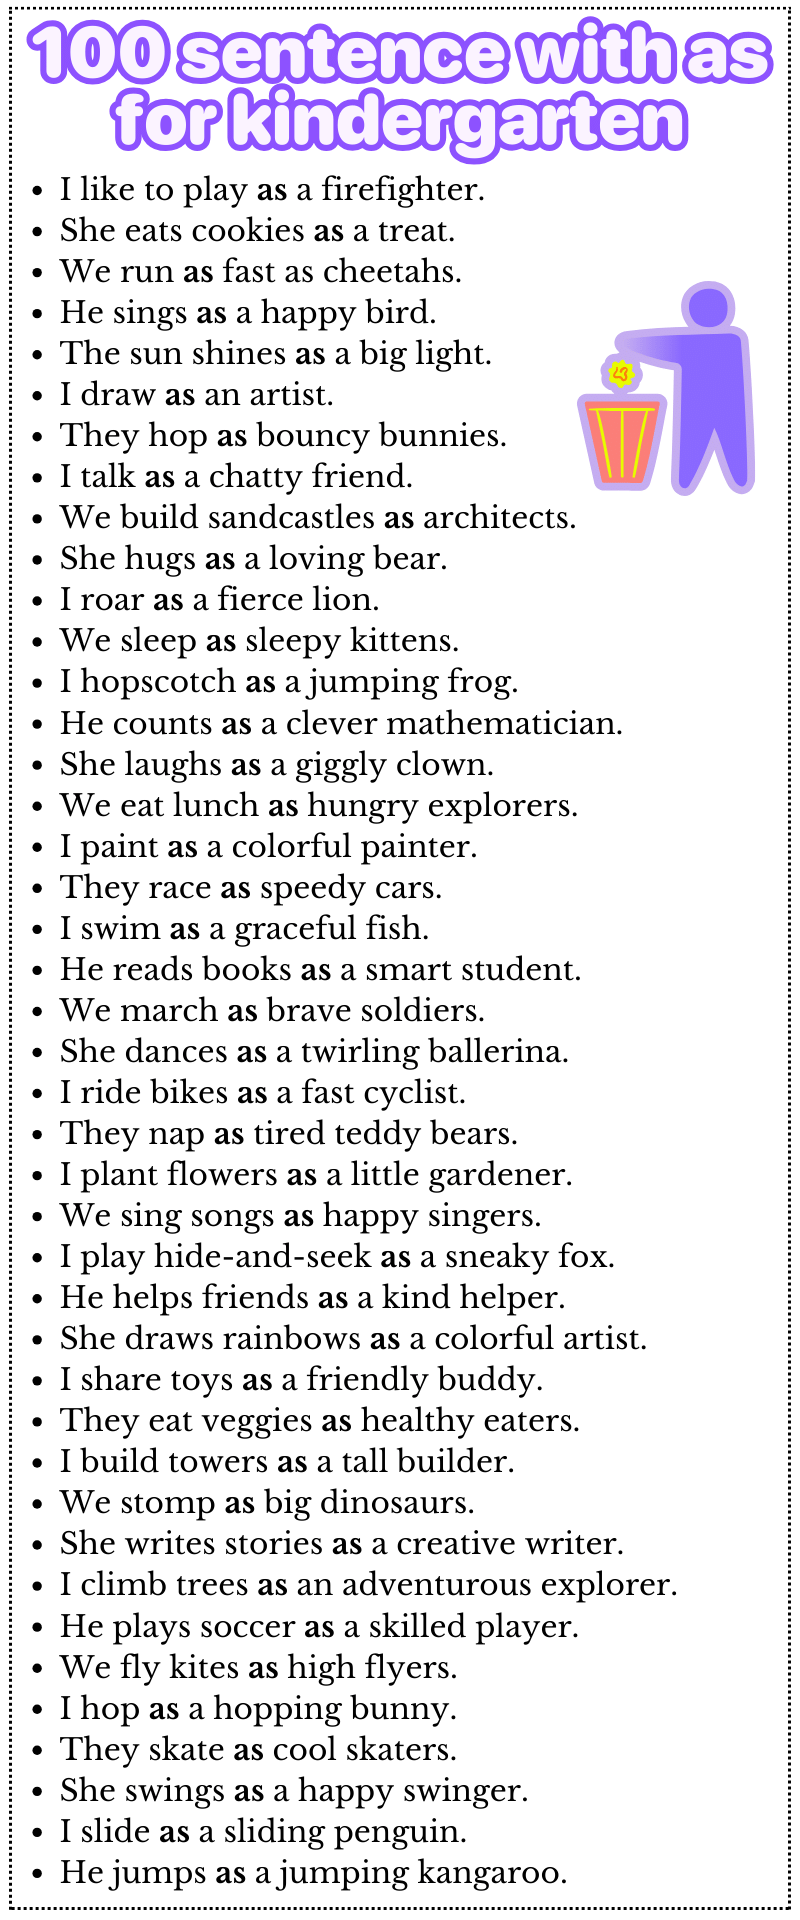 100 sentence with as for kindergarten